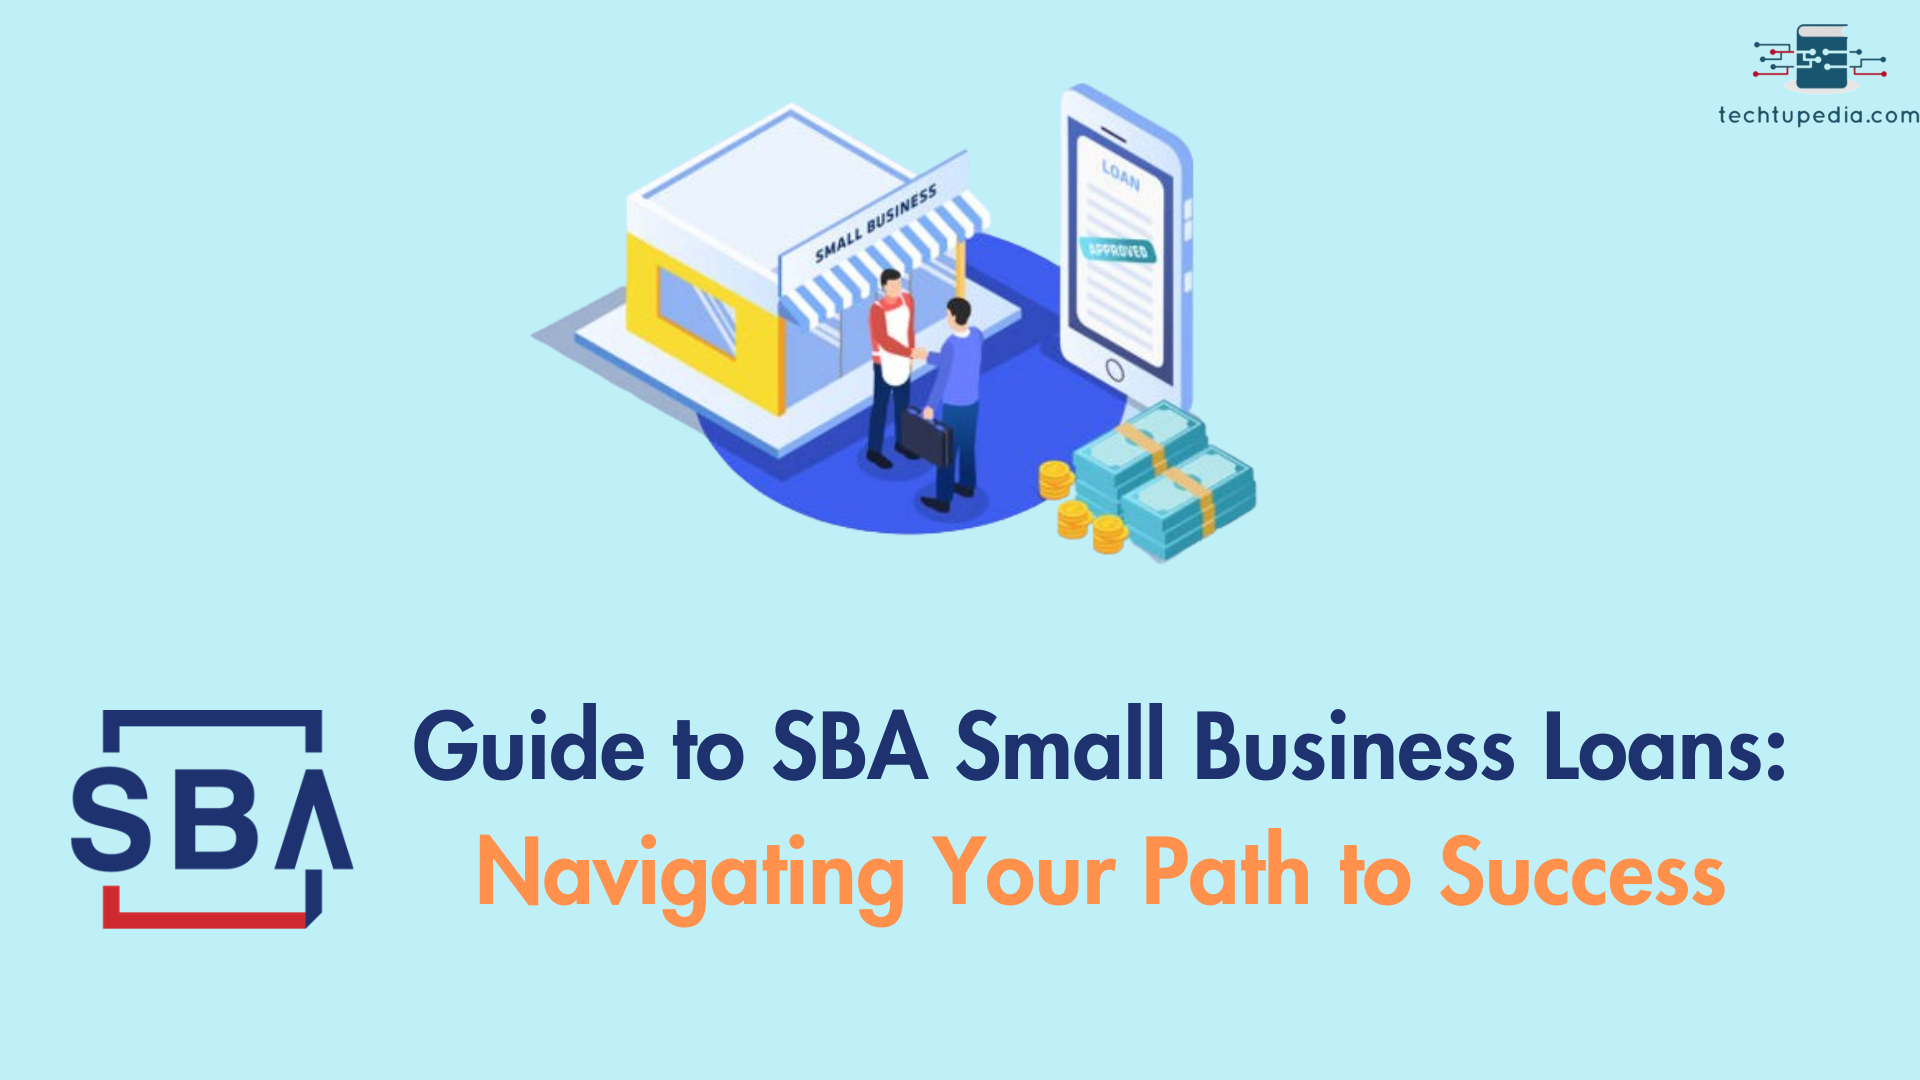 Guide to SBA Small Business Loans: Navigating Your Path to Success